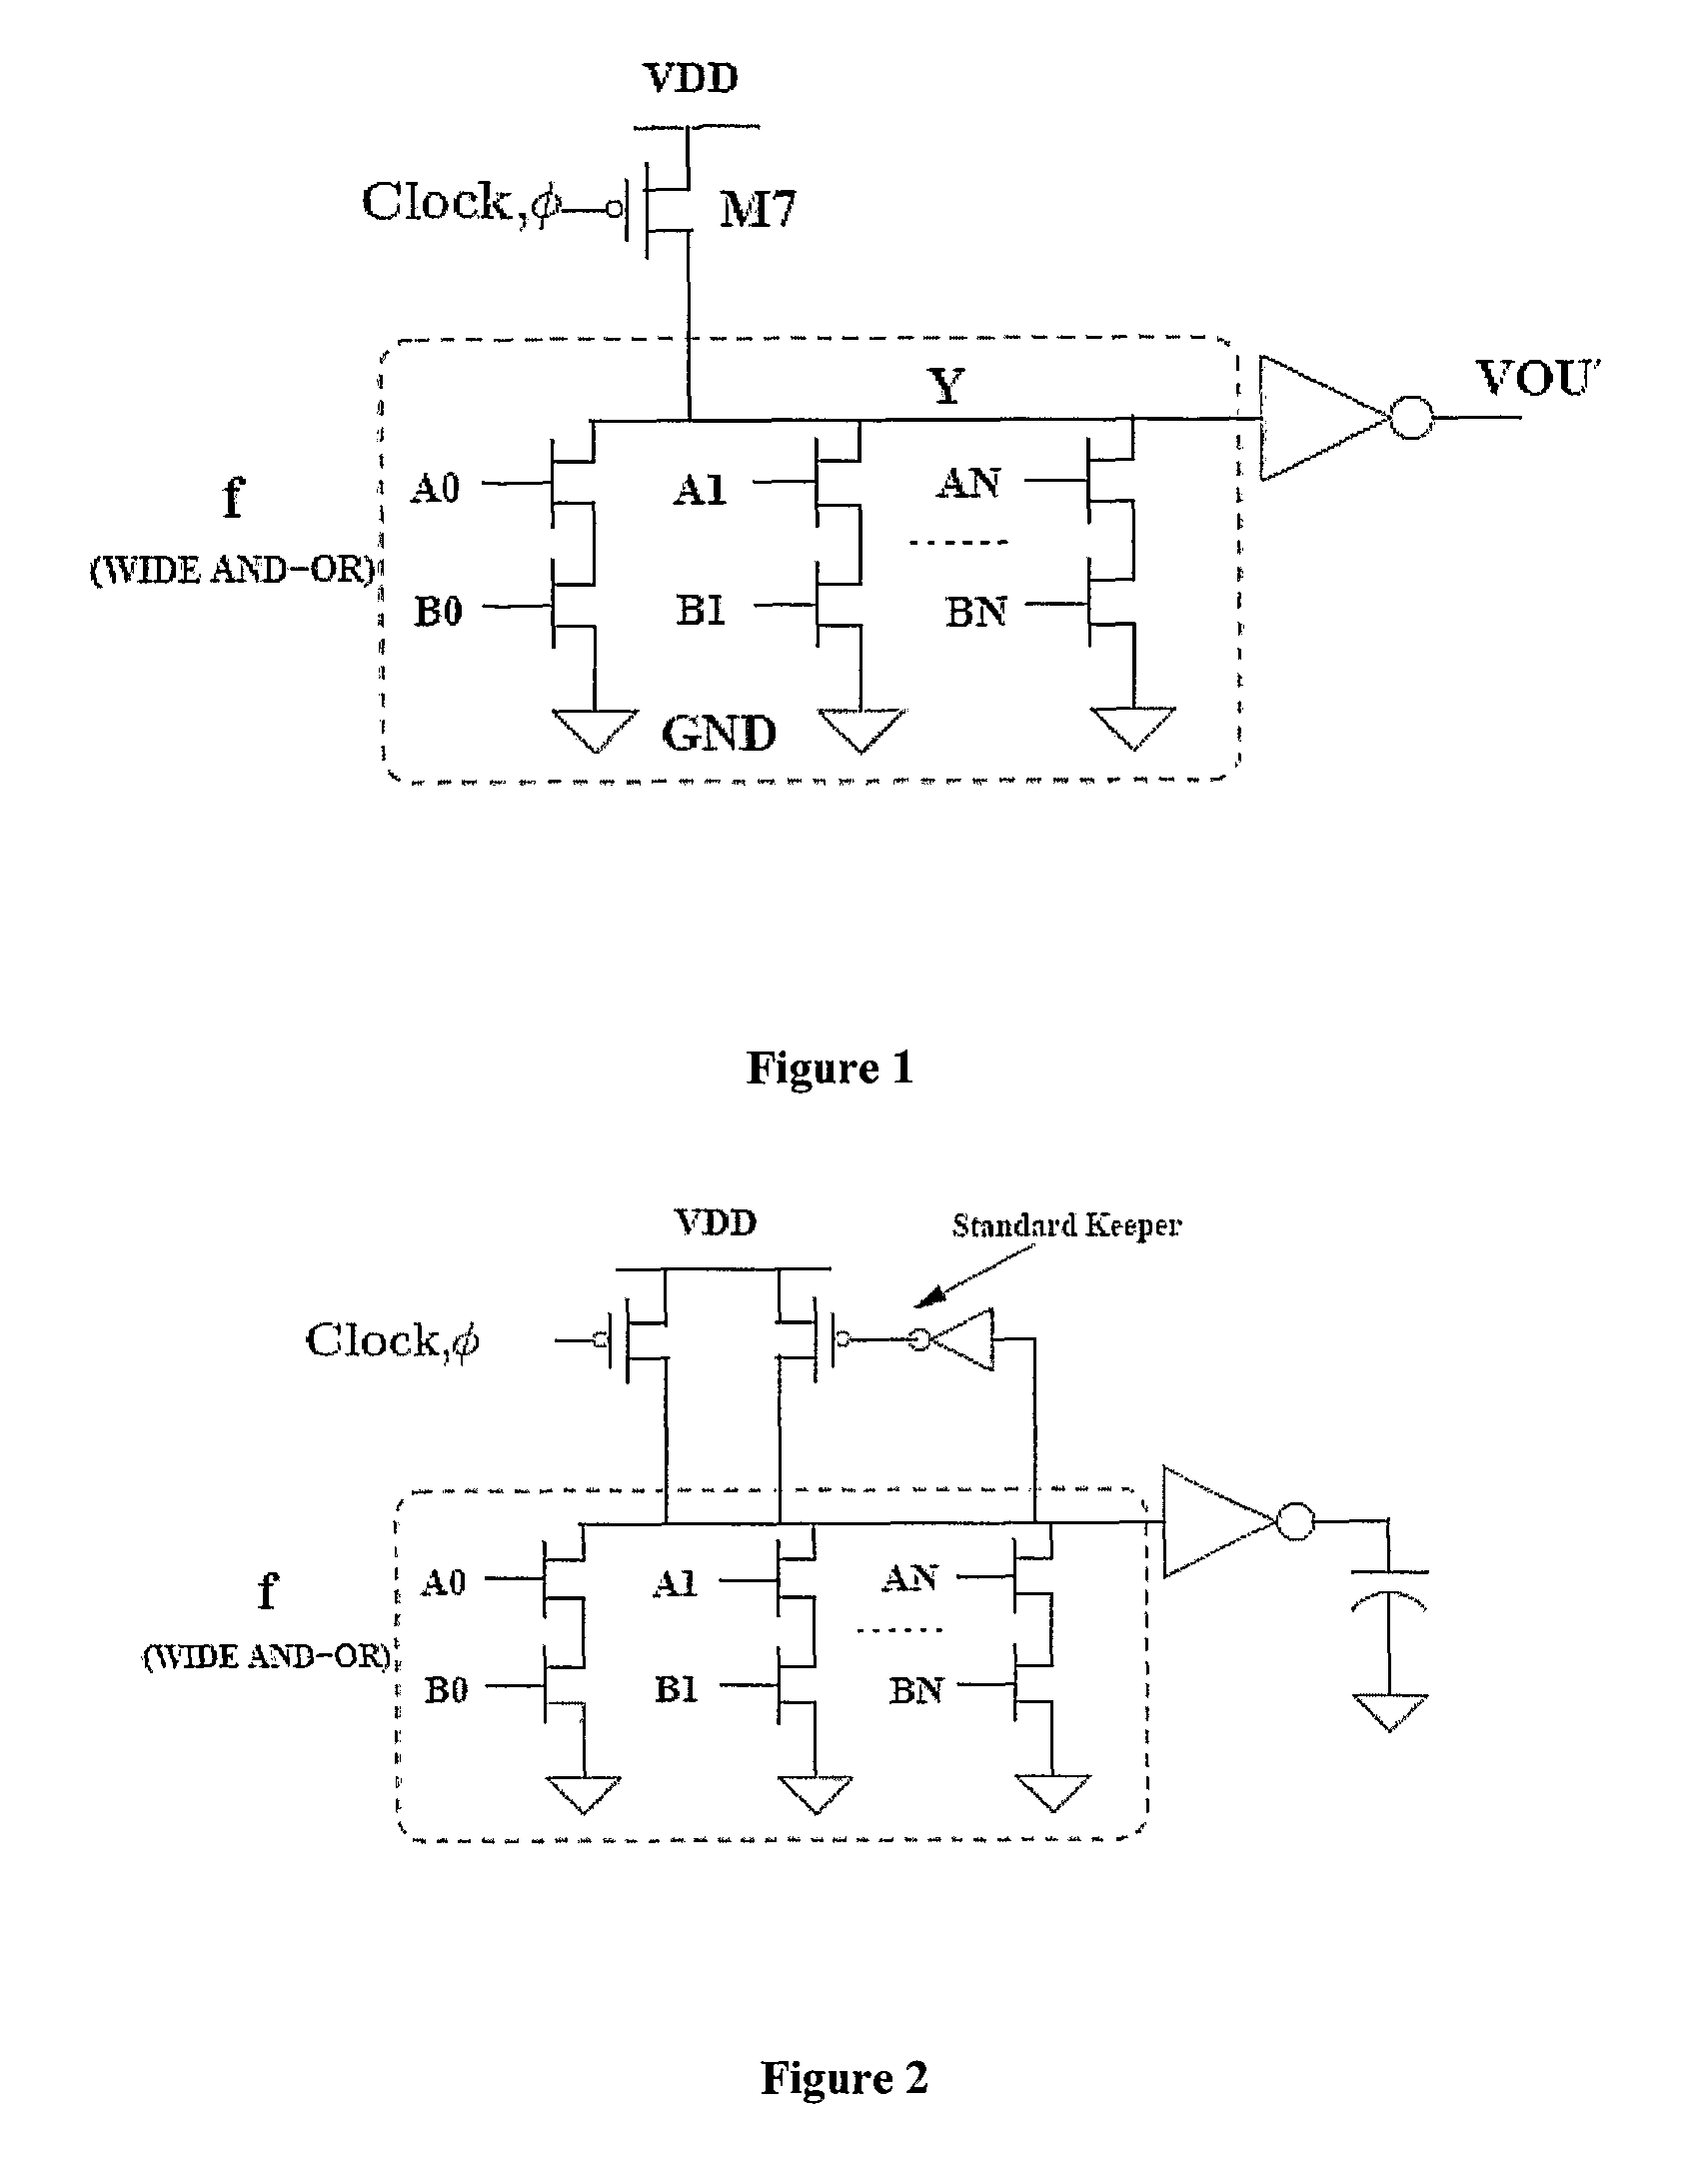 Adaptive keeper circuit to control domino logic dynamic circuits using rate sensing technique